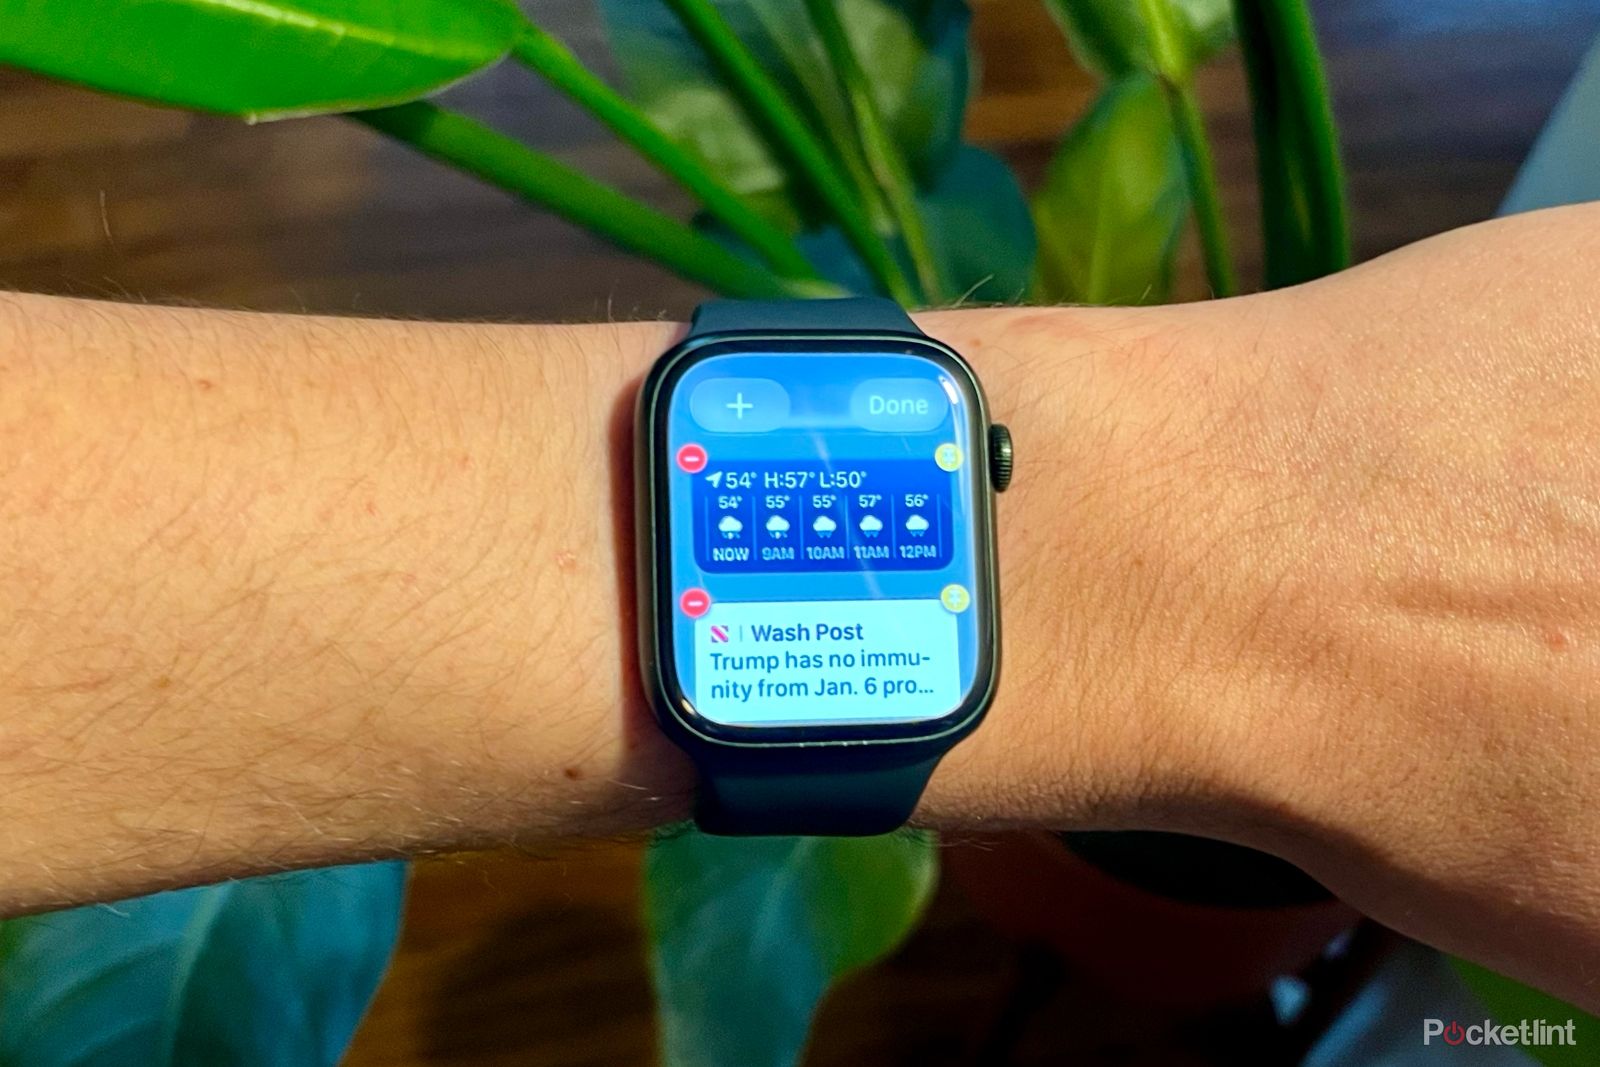 The Smart Stack on the Apple Watch in editing mode.